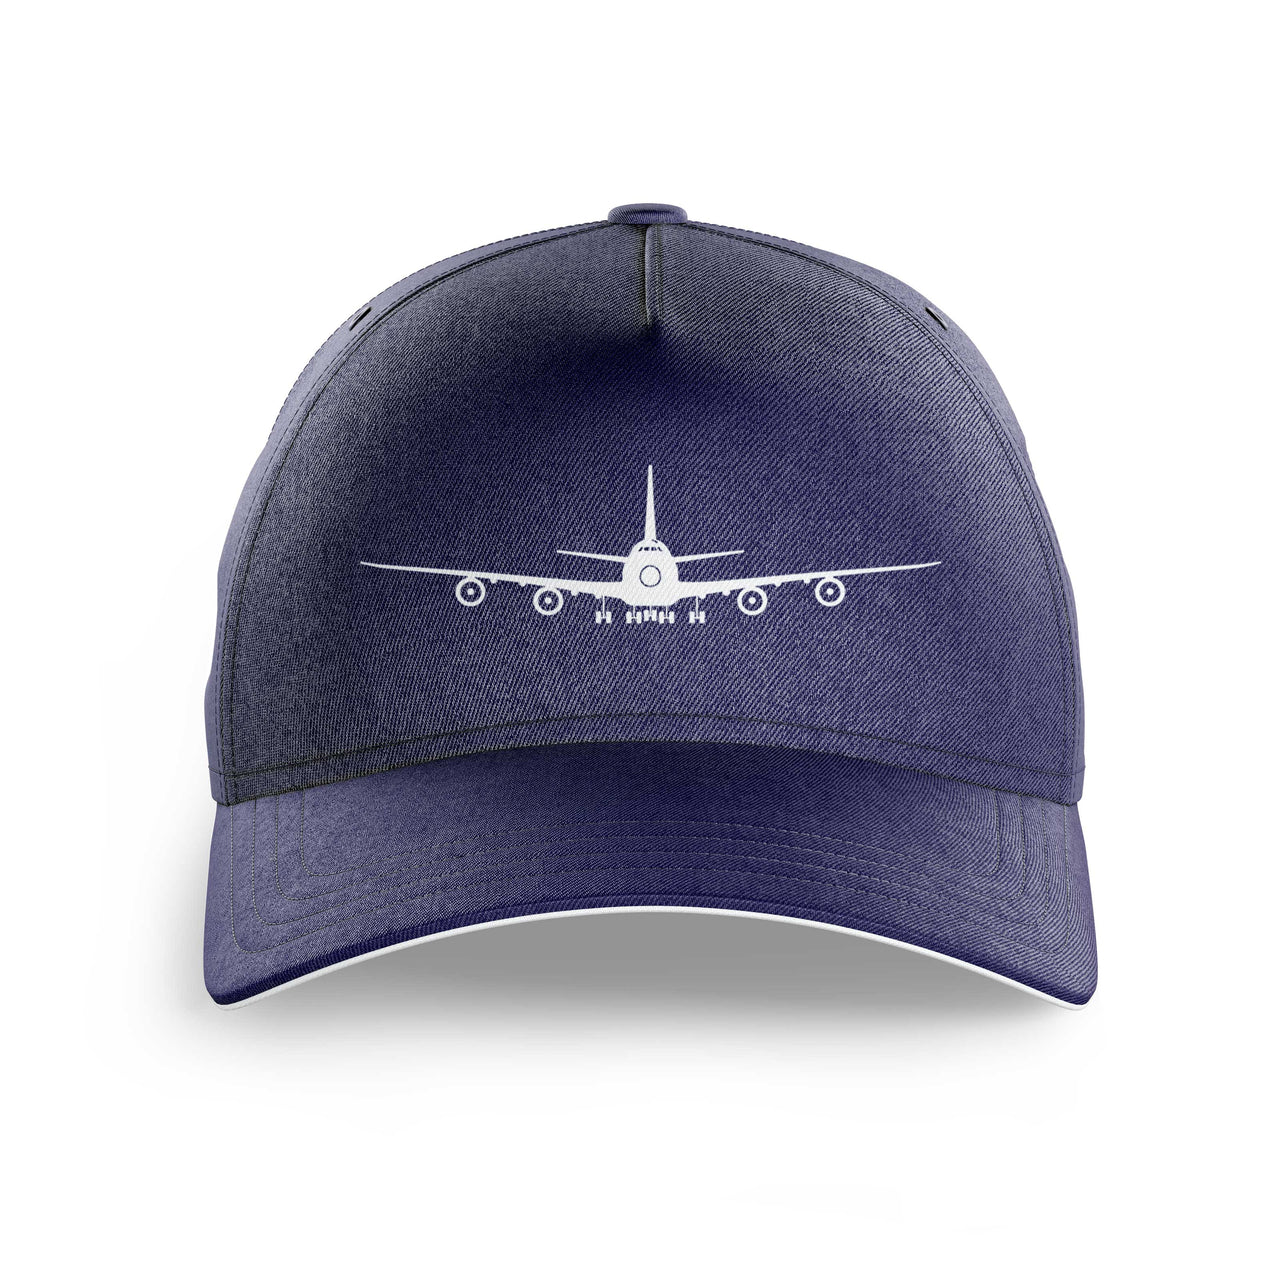 Boeing 747 Silhouette Printed Hats